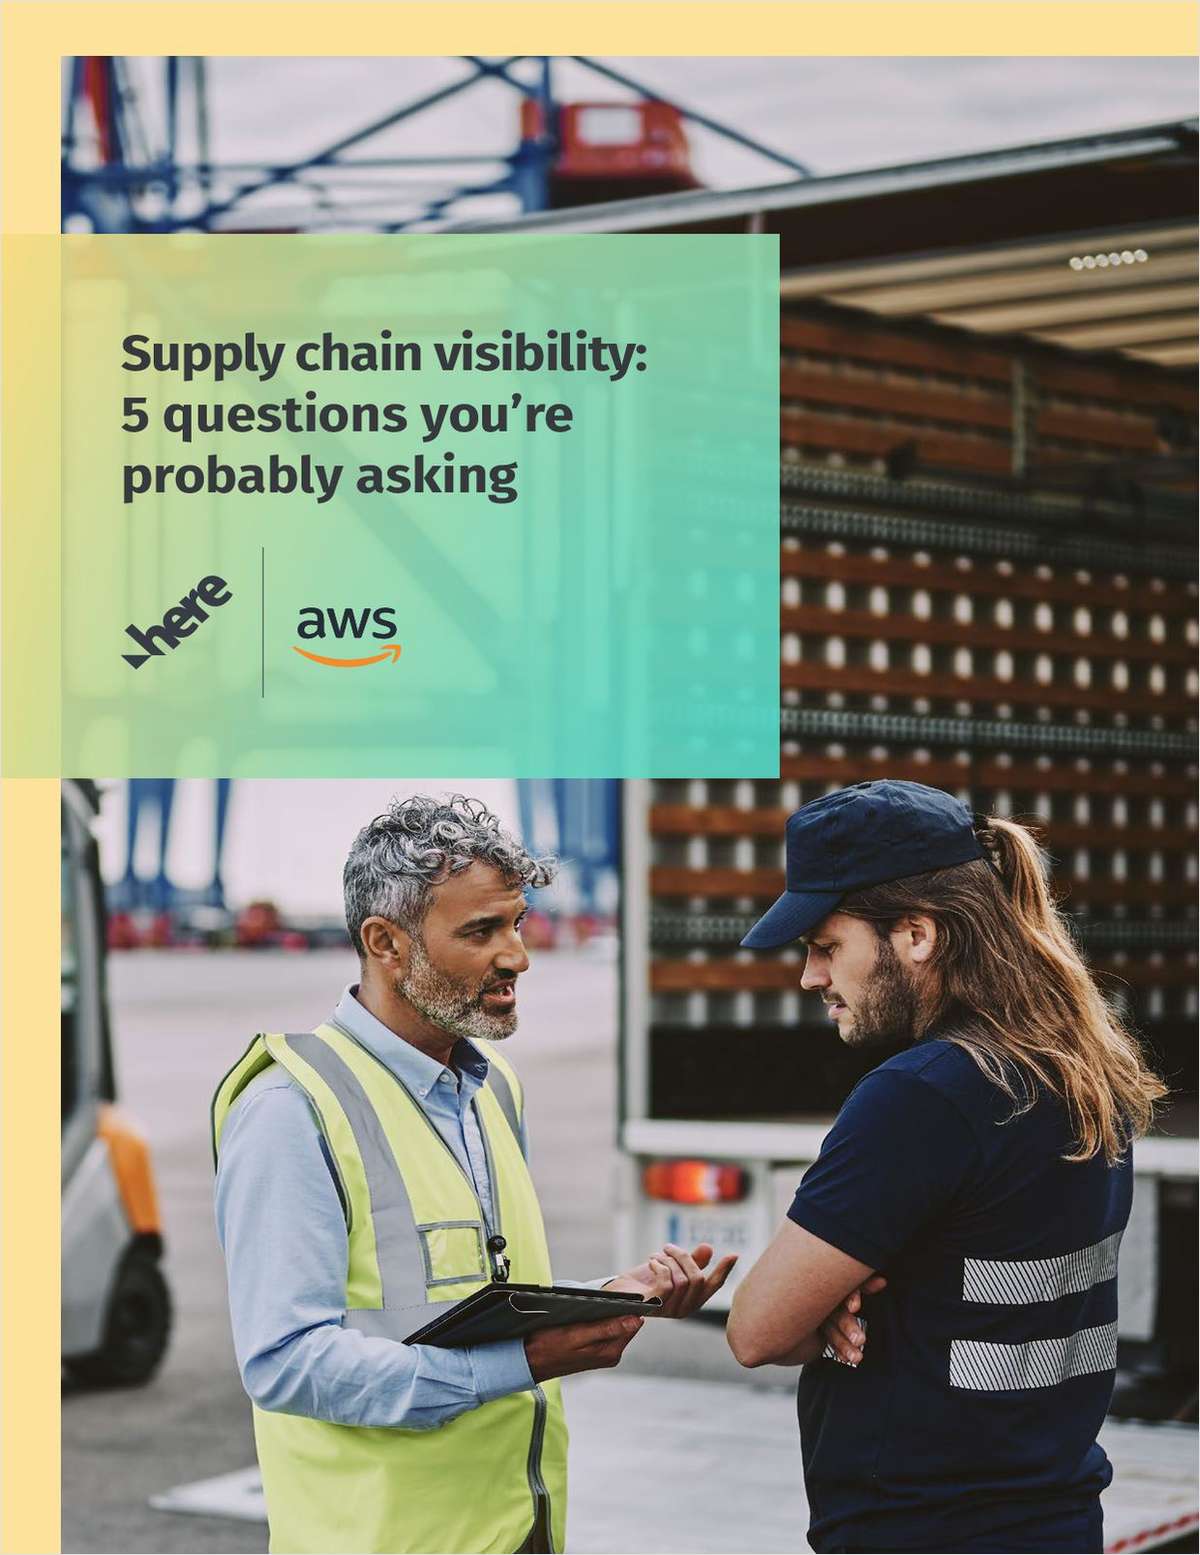 Supply chain visibility: 5 questions you're probably asking